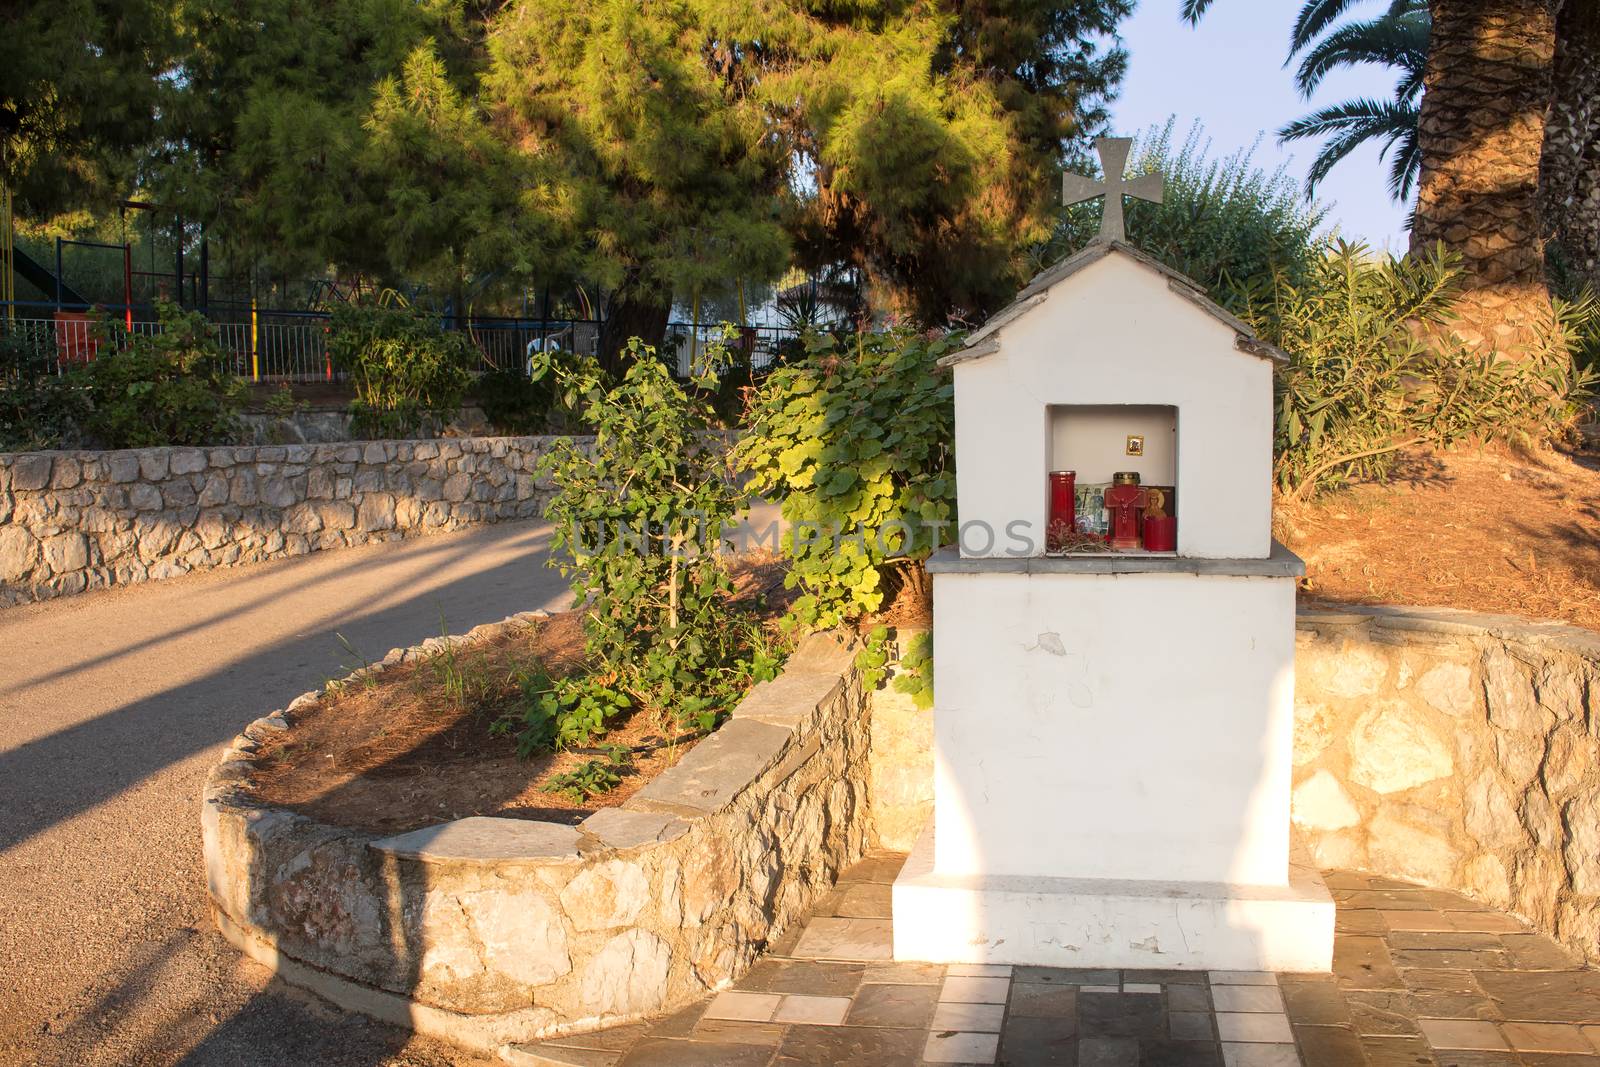 Memorial shrine, tradition in Greece. Situated by the road. Early evening sunlinght.